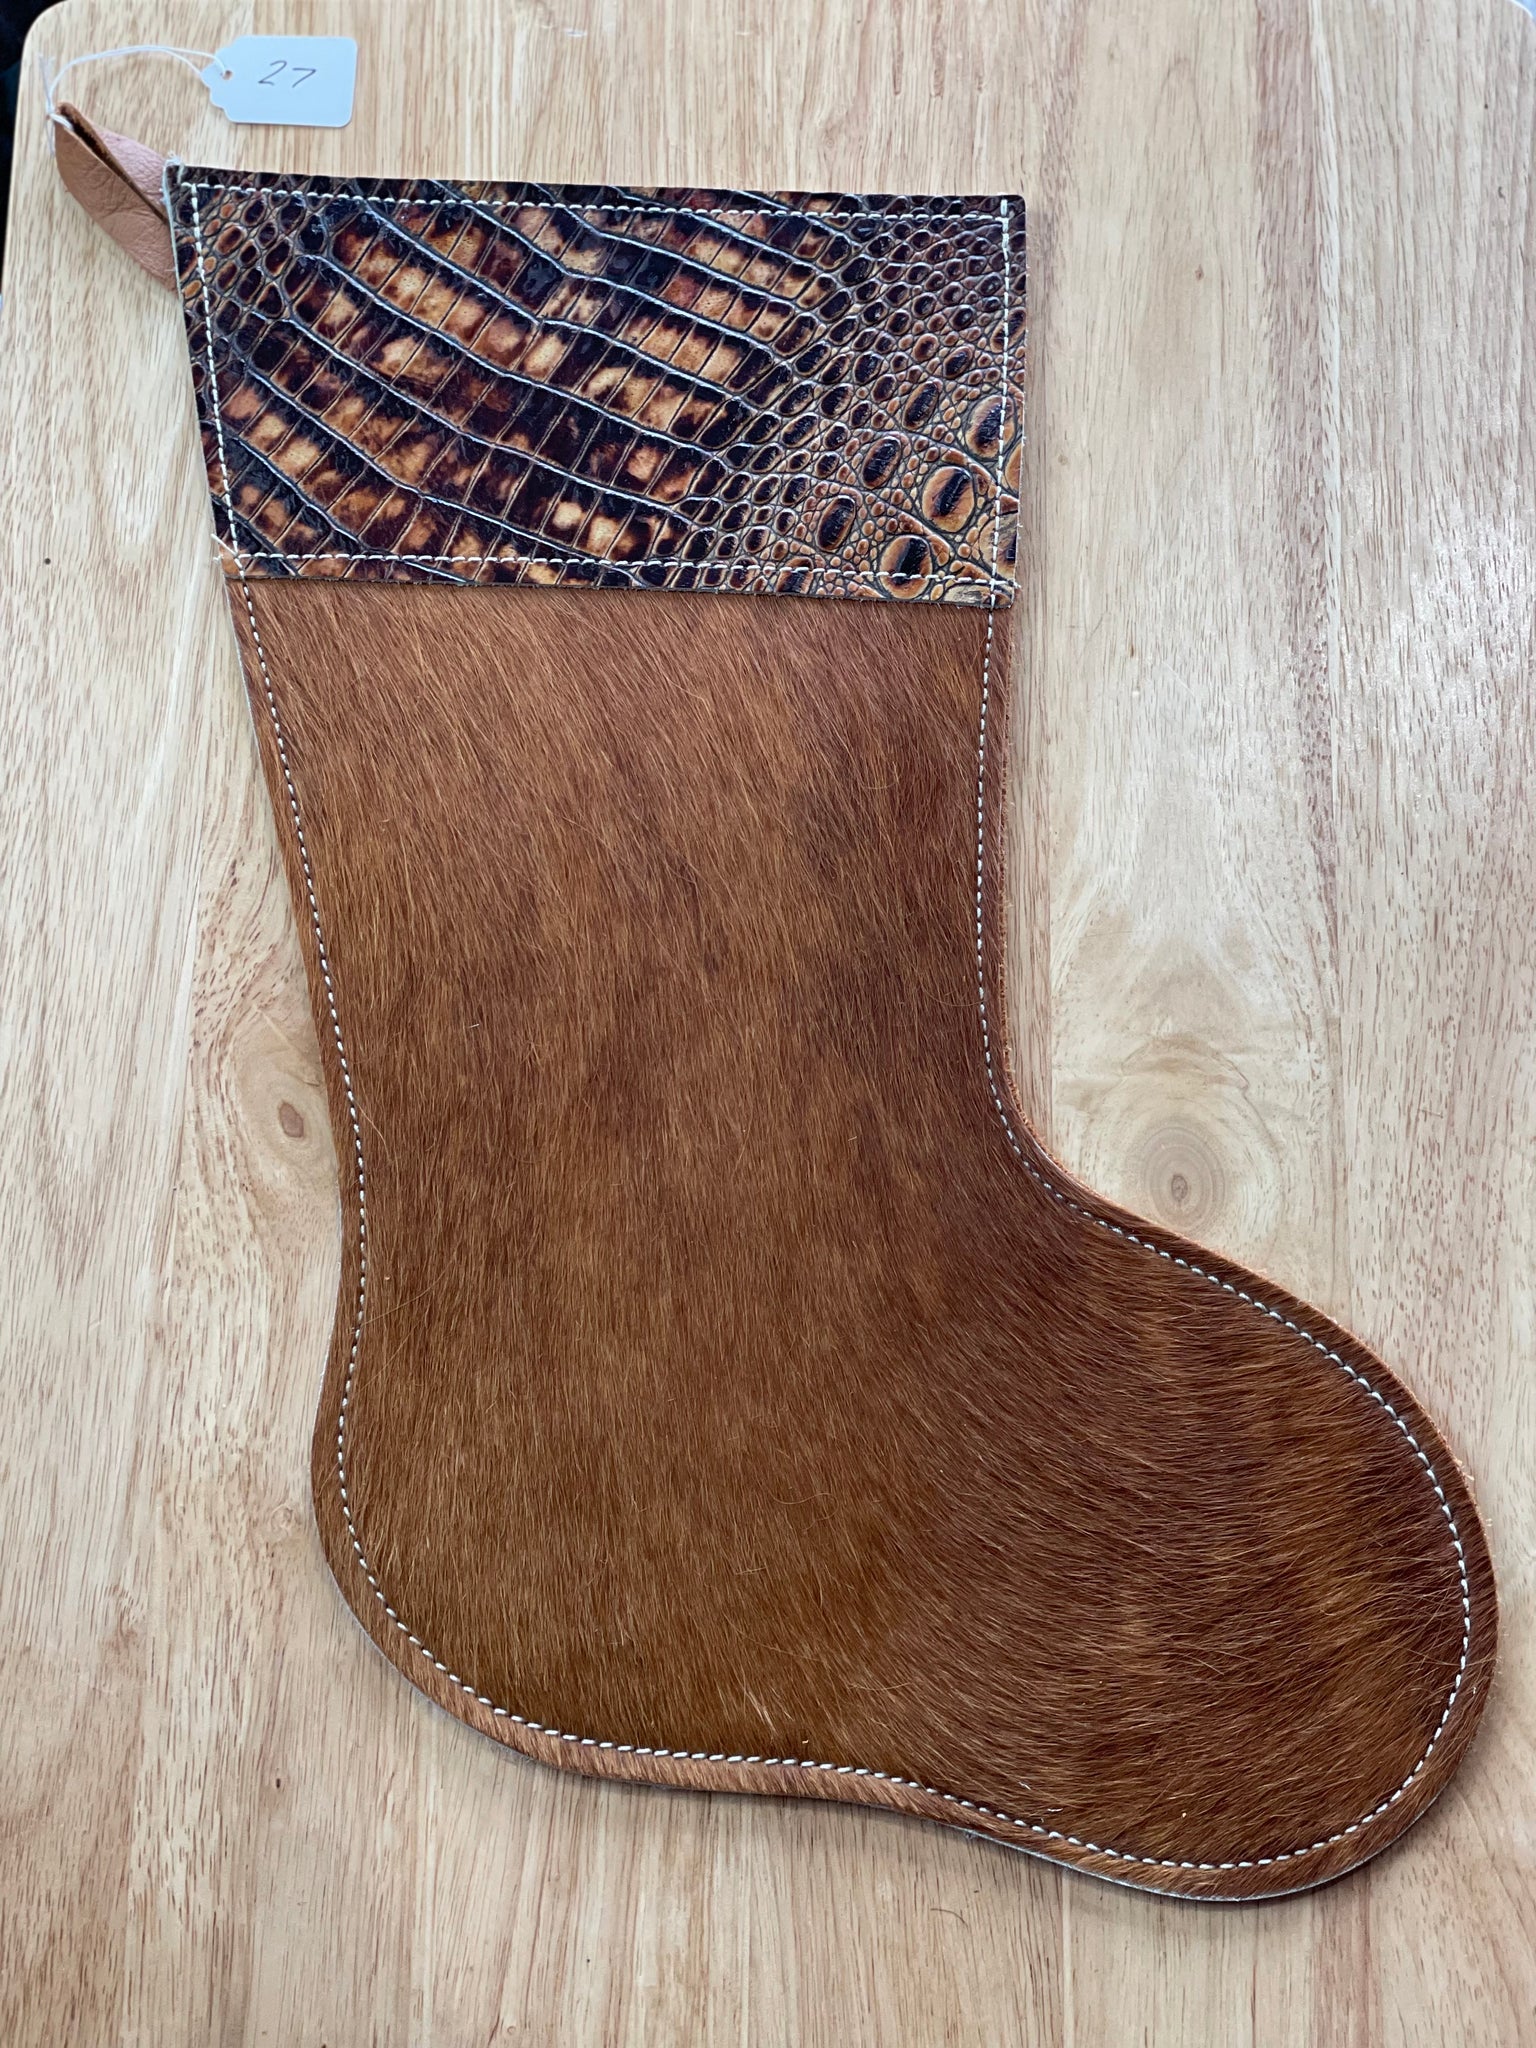 Cowhide and Leather Christmas Stocking #27